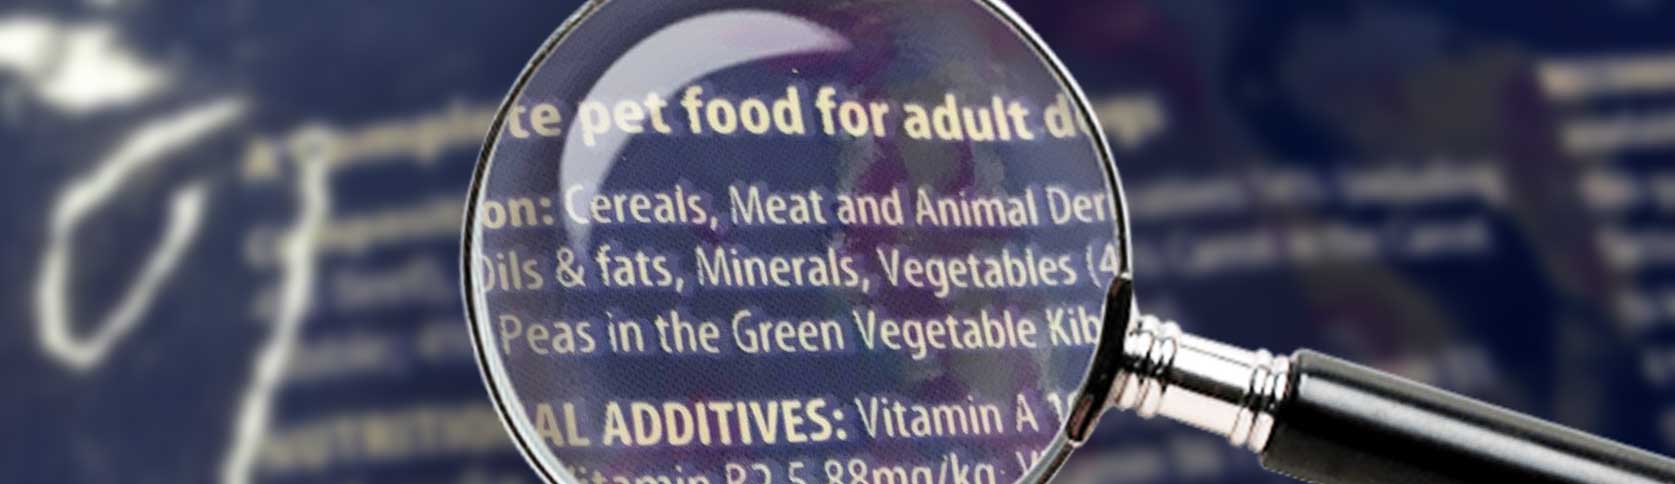 Dog food labelling - smoke and mirrors